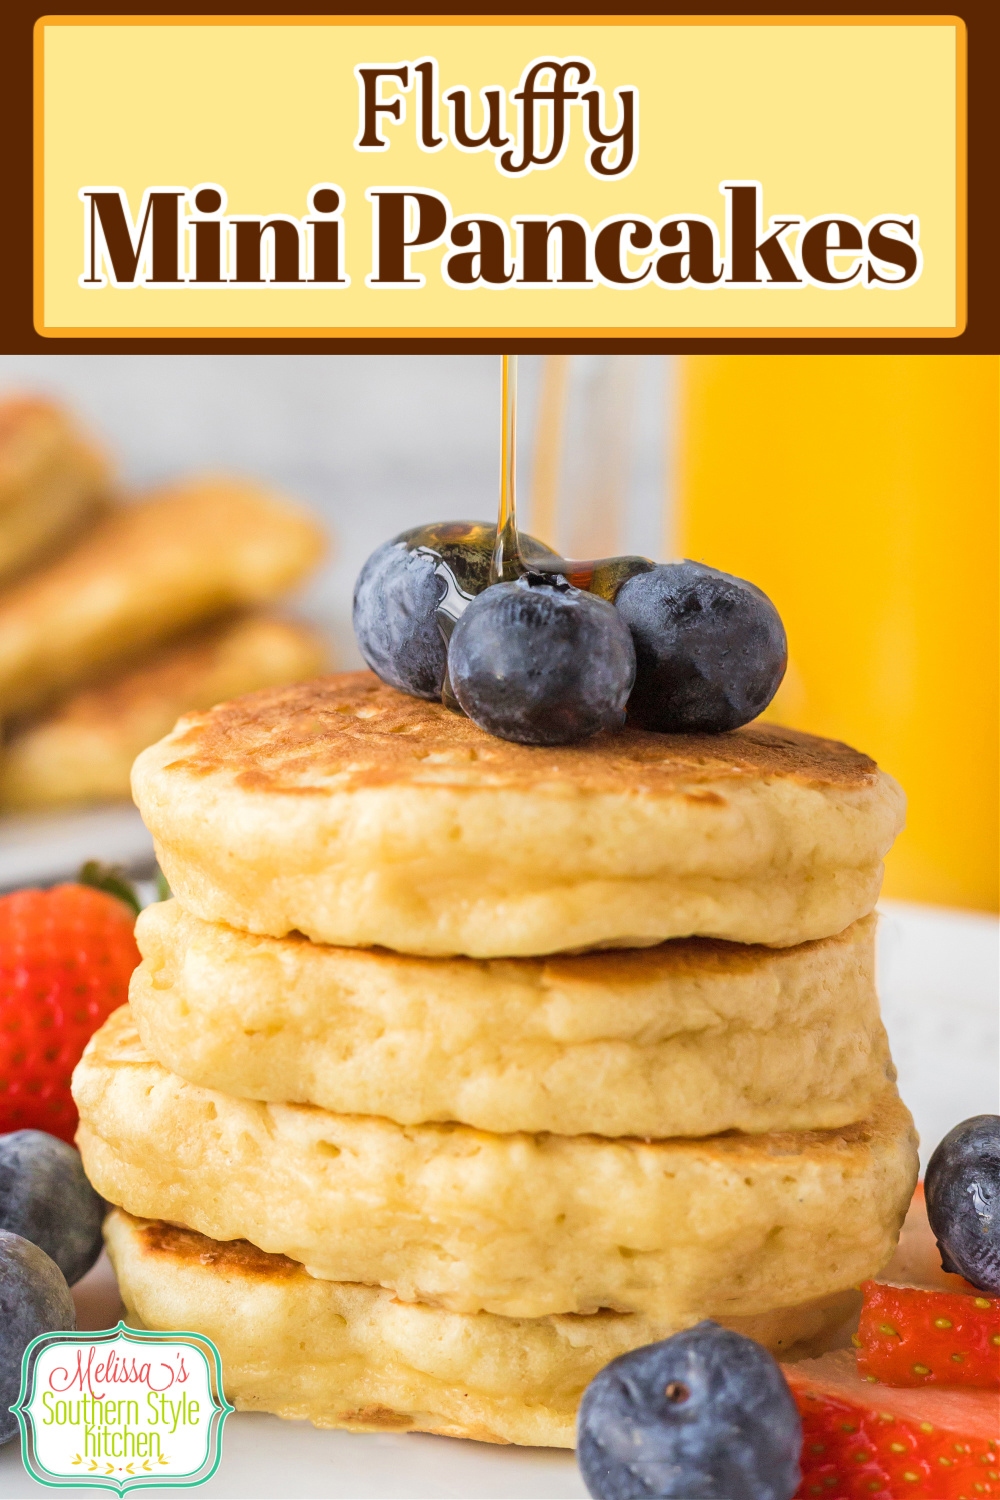 Serve this fluffy Mini Pancakes Recipe with a side of fresh fruit, a pat of sweet cream butter and a generous drizzle of pure maple syrup. #pancakes #silverdollarpancakes #pancakerecipes #minipancakes #buttermilkpancakes #easypancakes